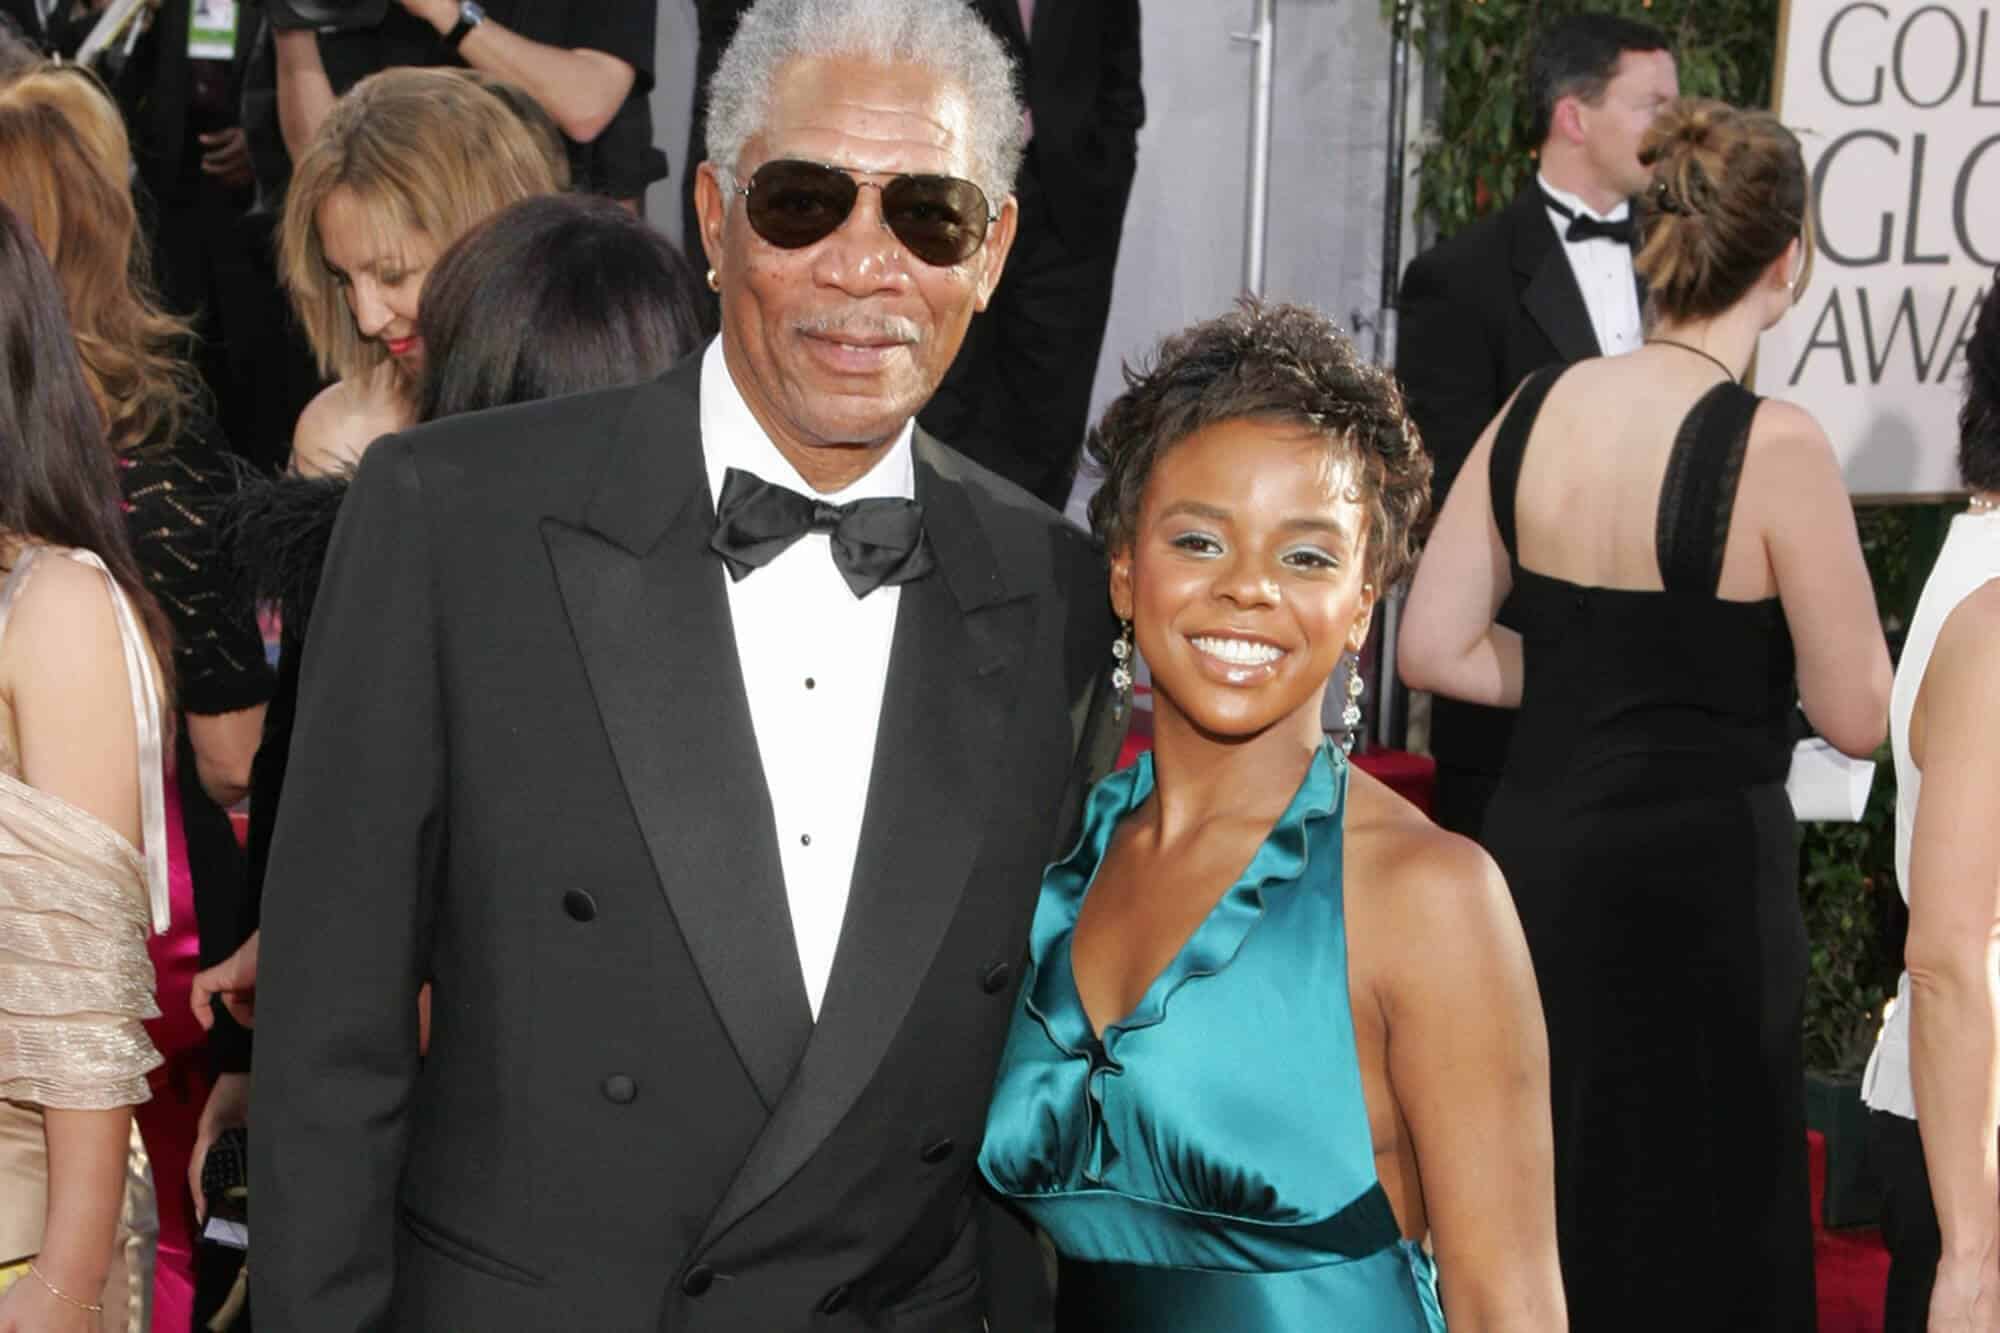 A man who stabbed granddaughter, Morgan Freeman, was sentenced to 20 years in prison